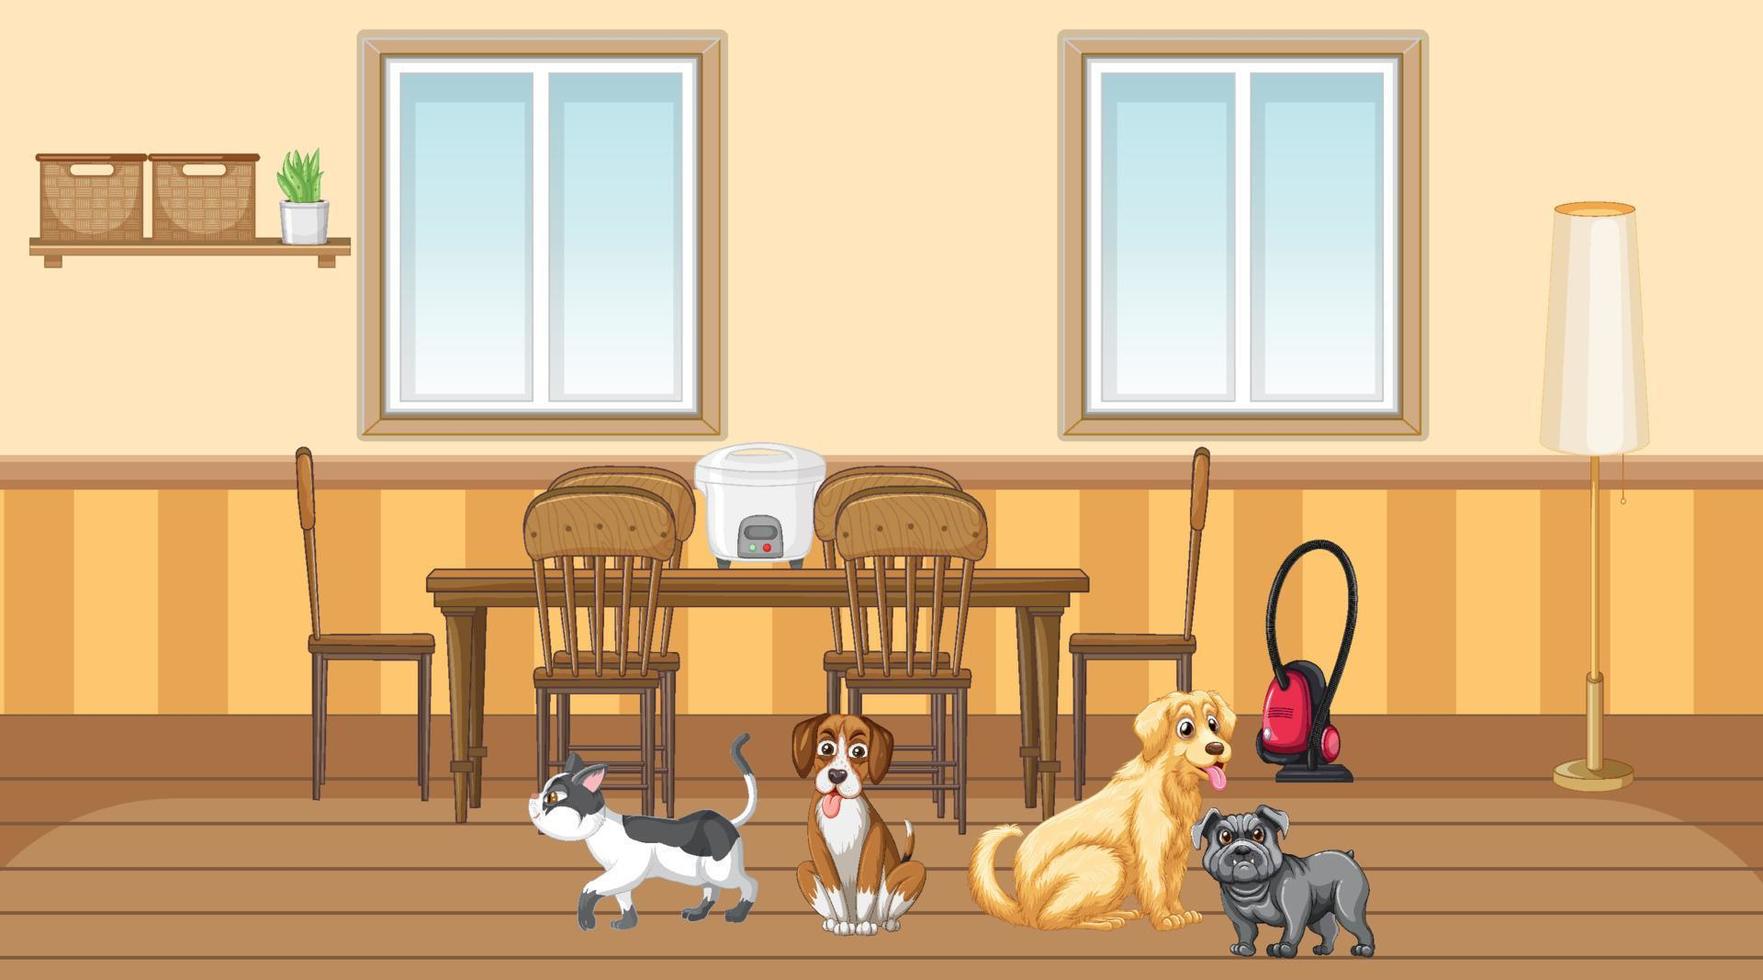 Set of different domestic animals in kitchen vector